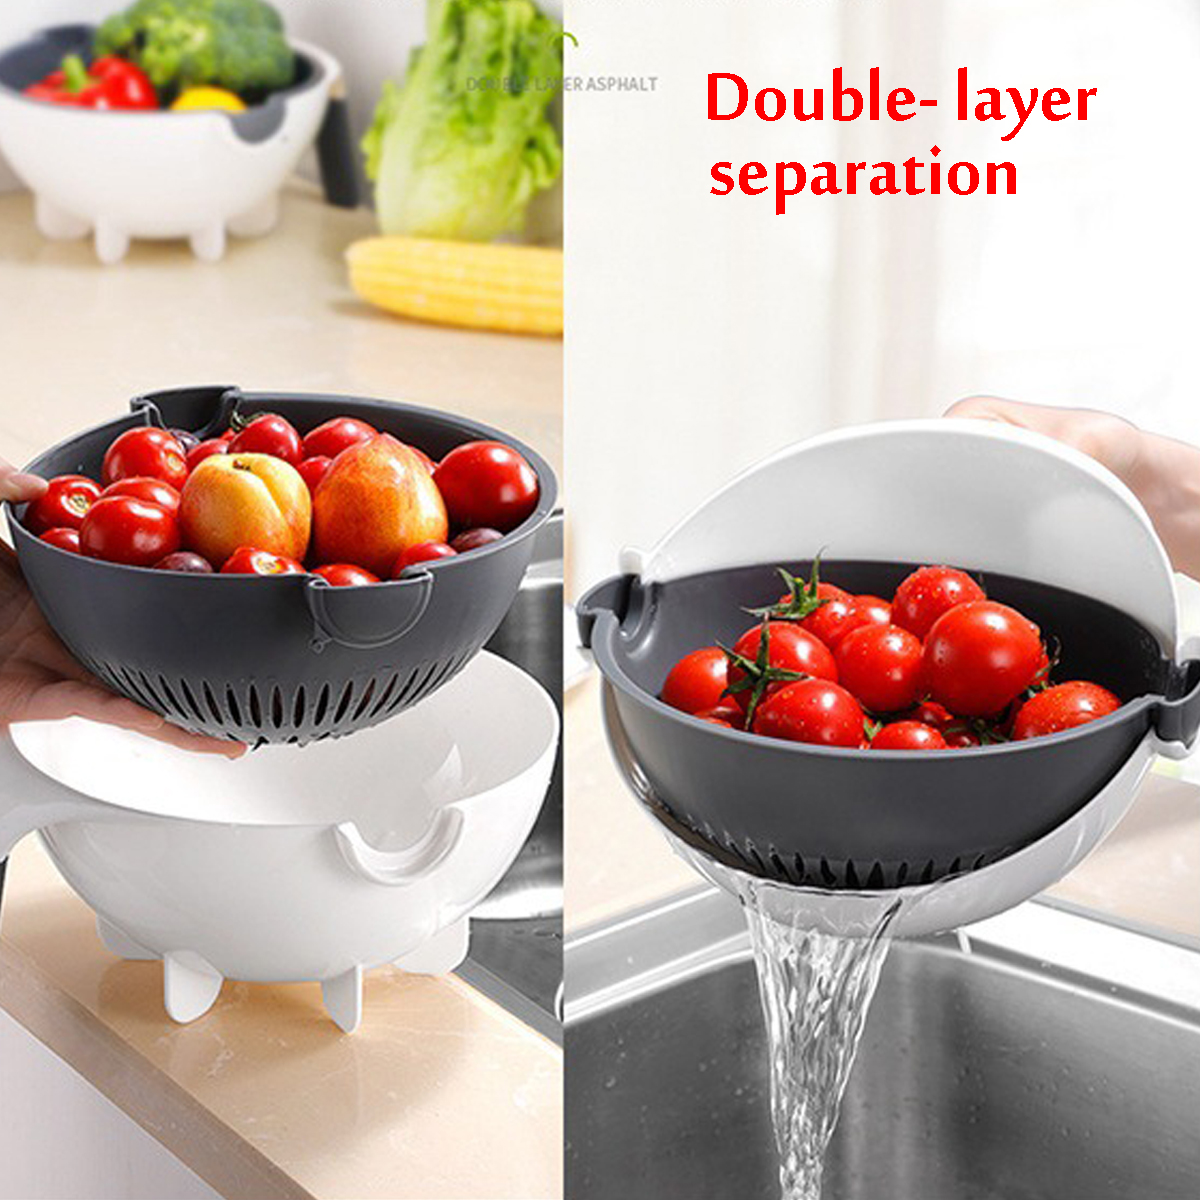 9-in1-Rotate-Vegetable-Cutter-Chopper-Fruit-Grater-Slicer-with-Basket-Drain-1737062-2